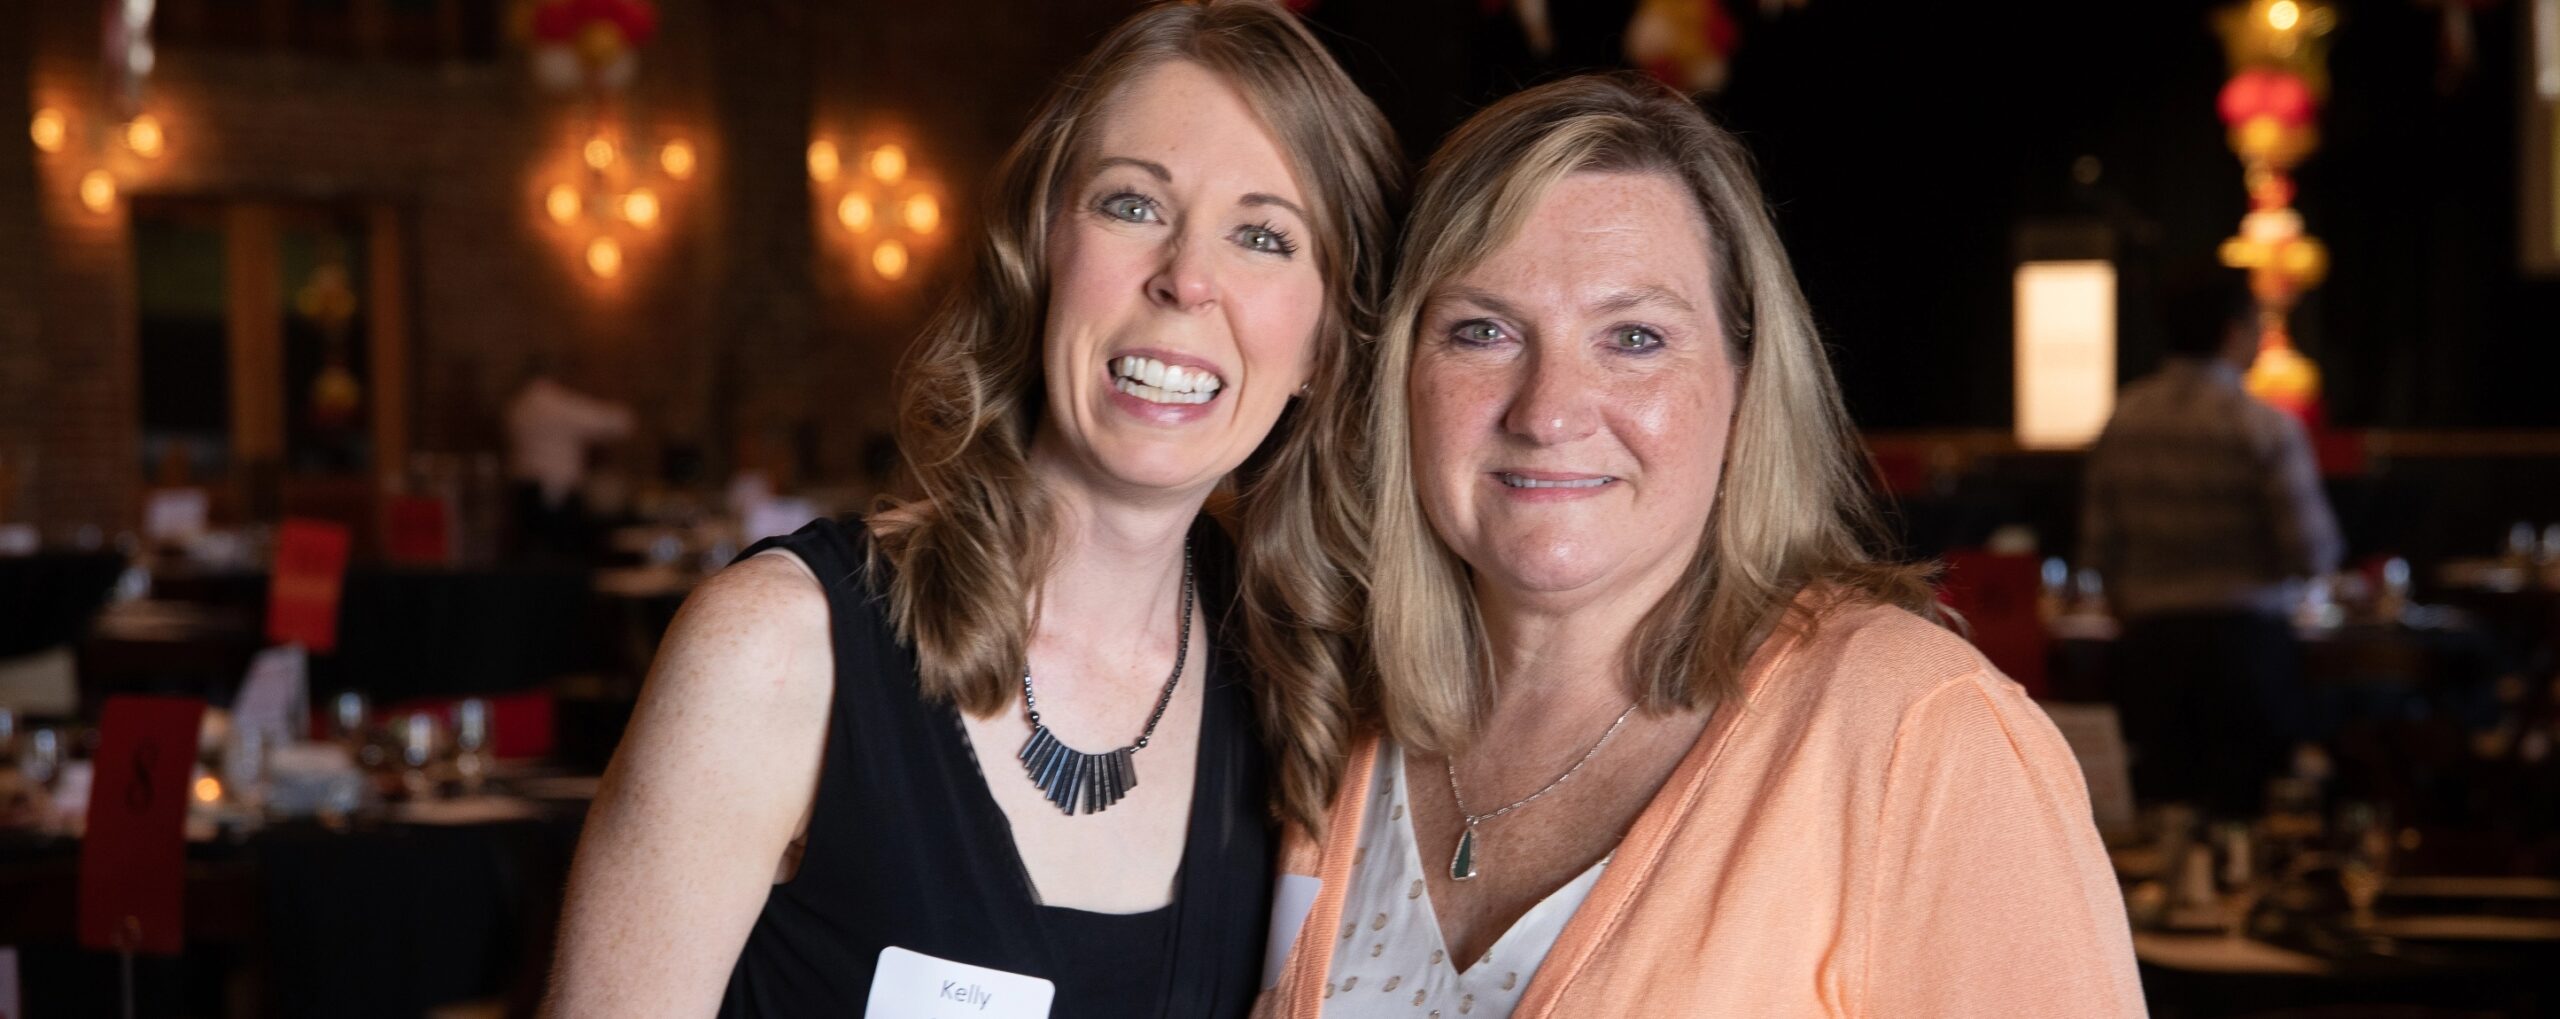 Two women posing for a photo at an event.